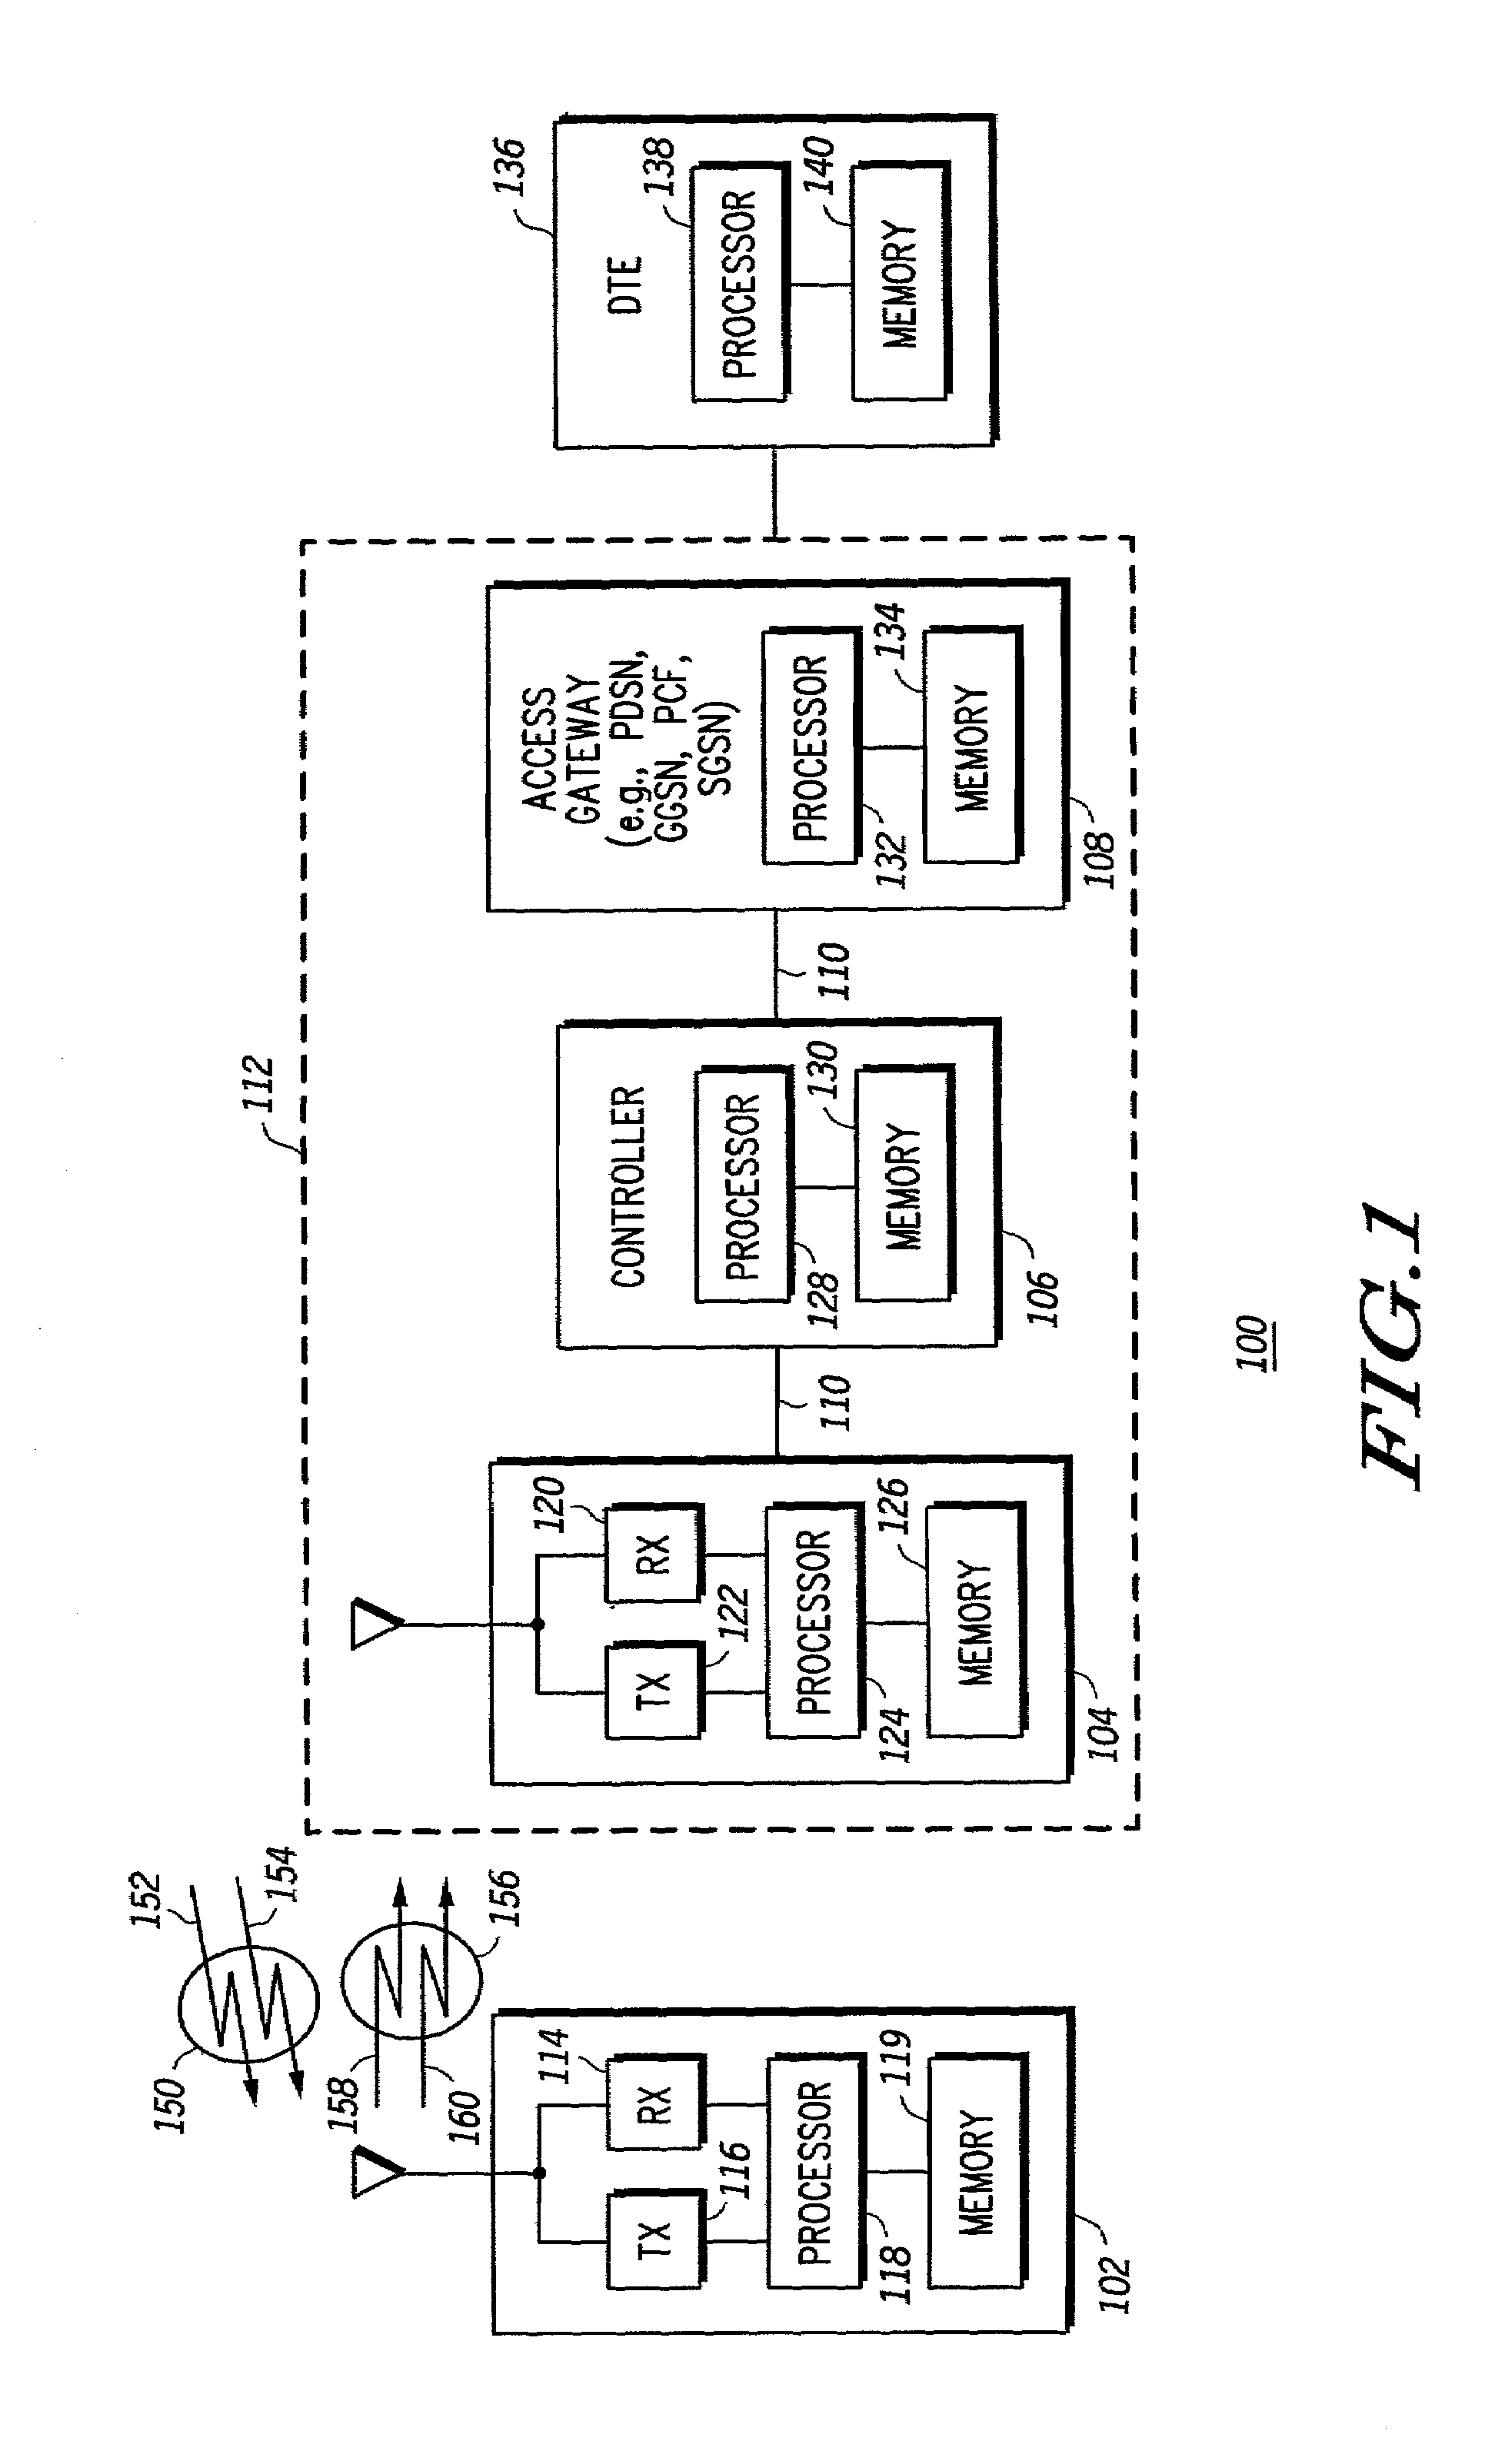 Method and apparatus for transmitting data in a communication system